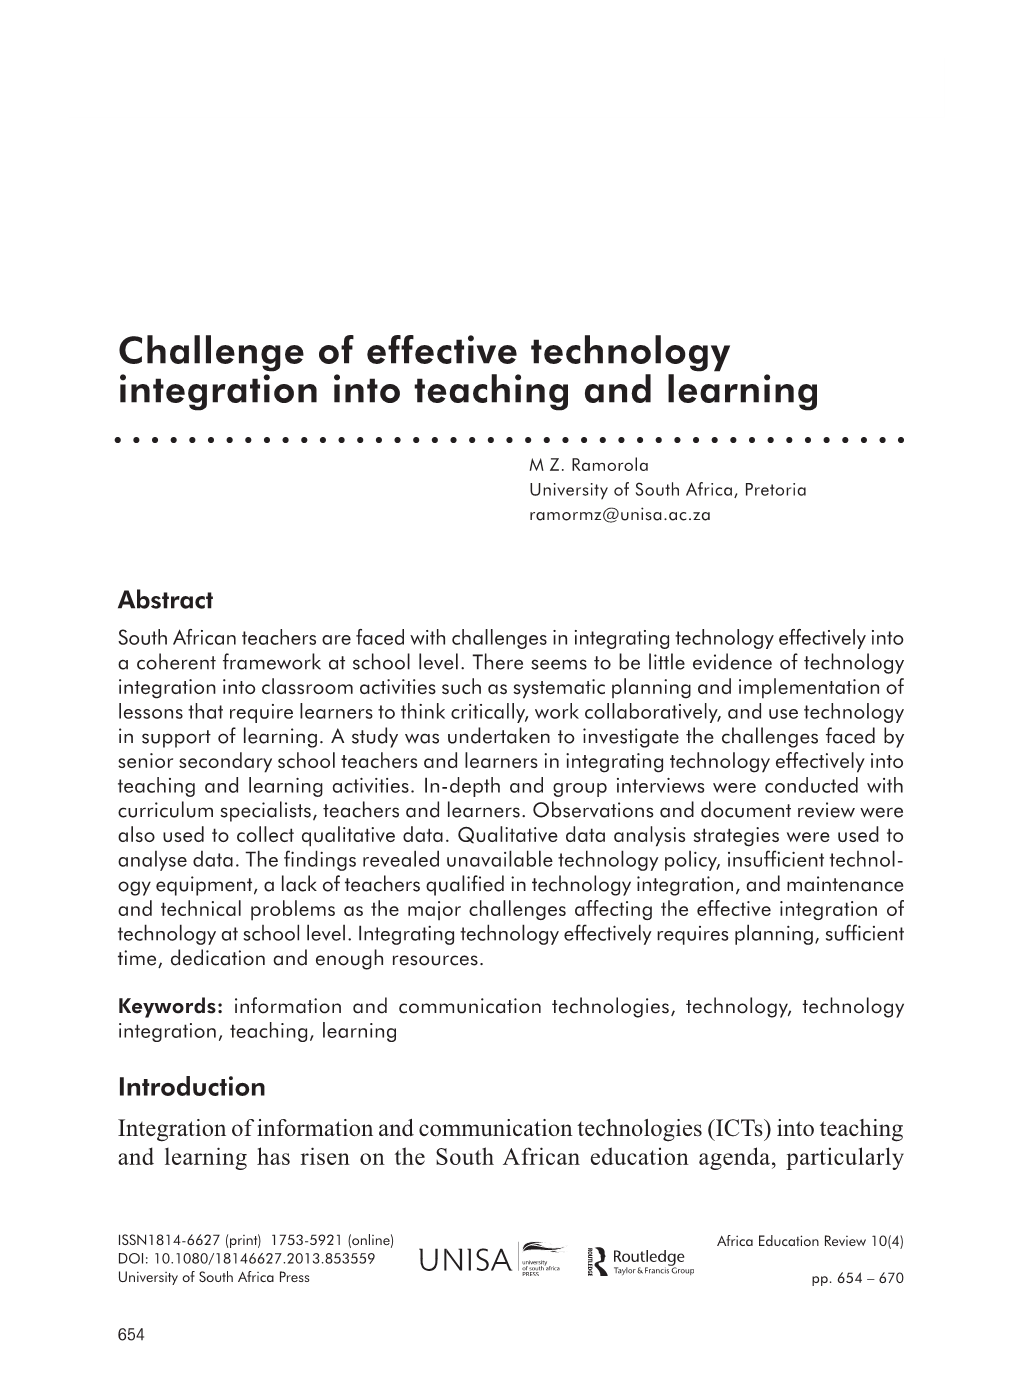 Challenge of Effective Technology Integration Into Teaching and Learning